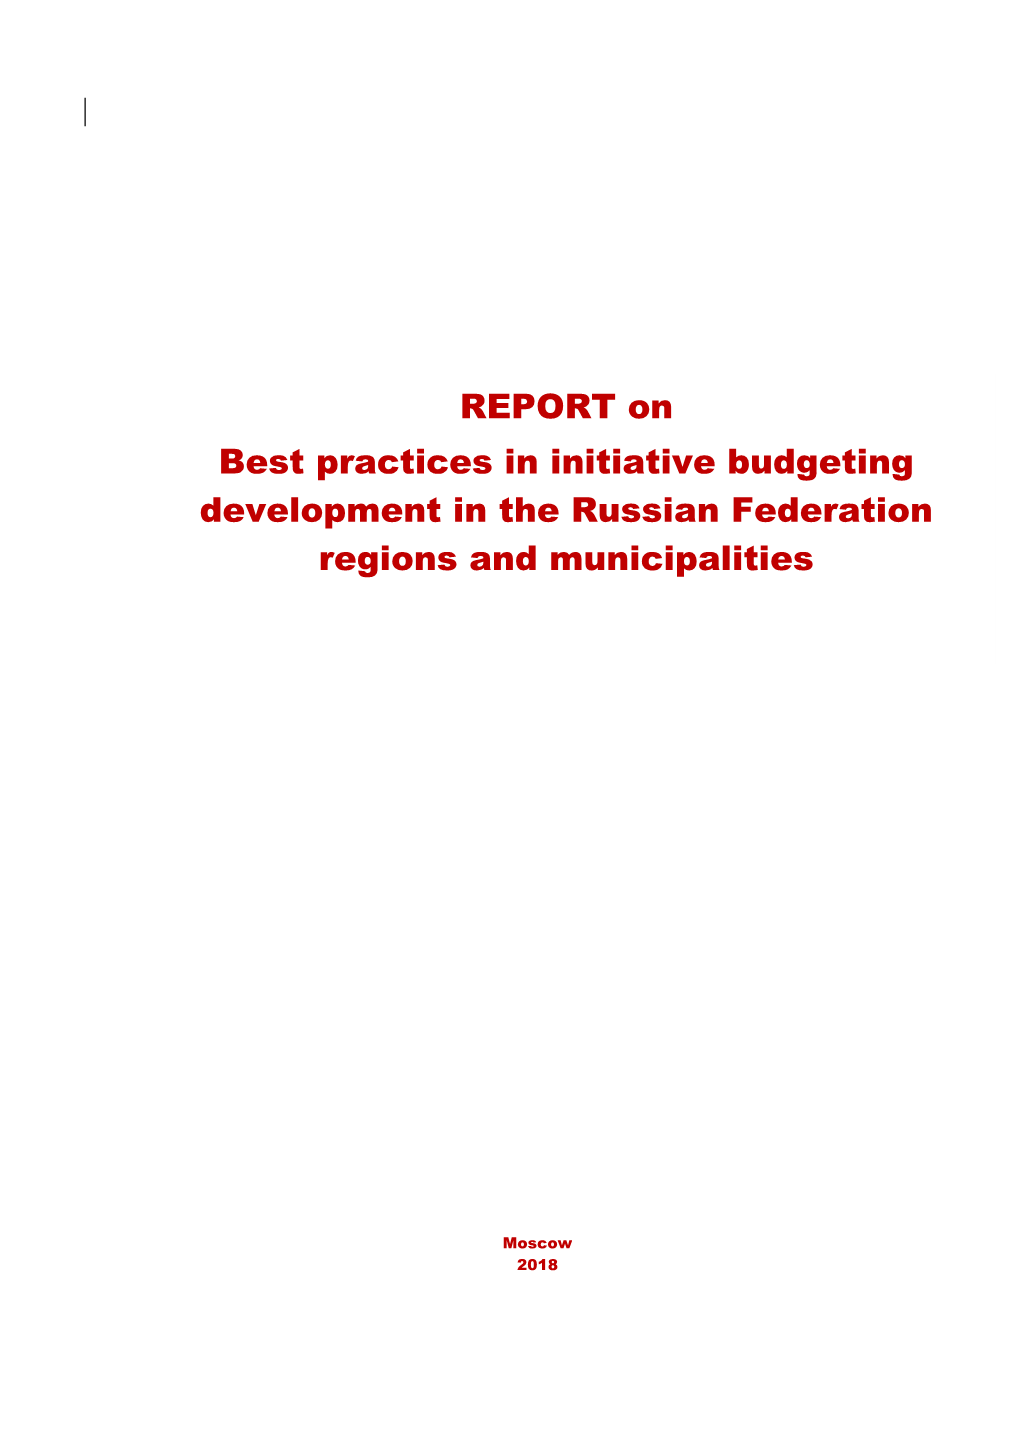 REPORT on Best Practices in Initiative Budgeting Development in the Russian Federation Regions and Municipalities